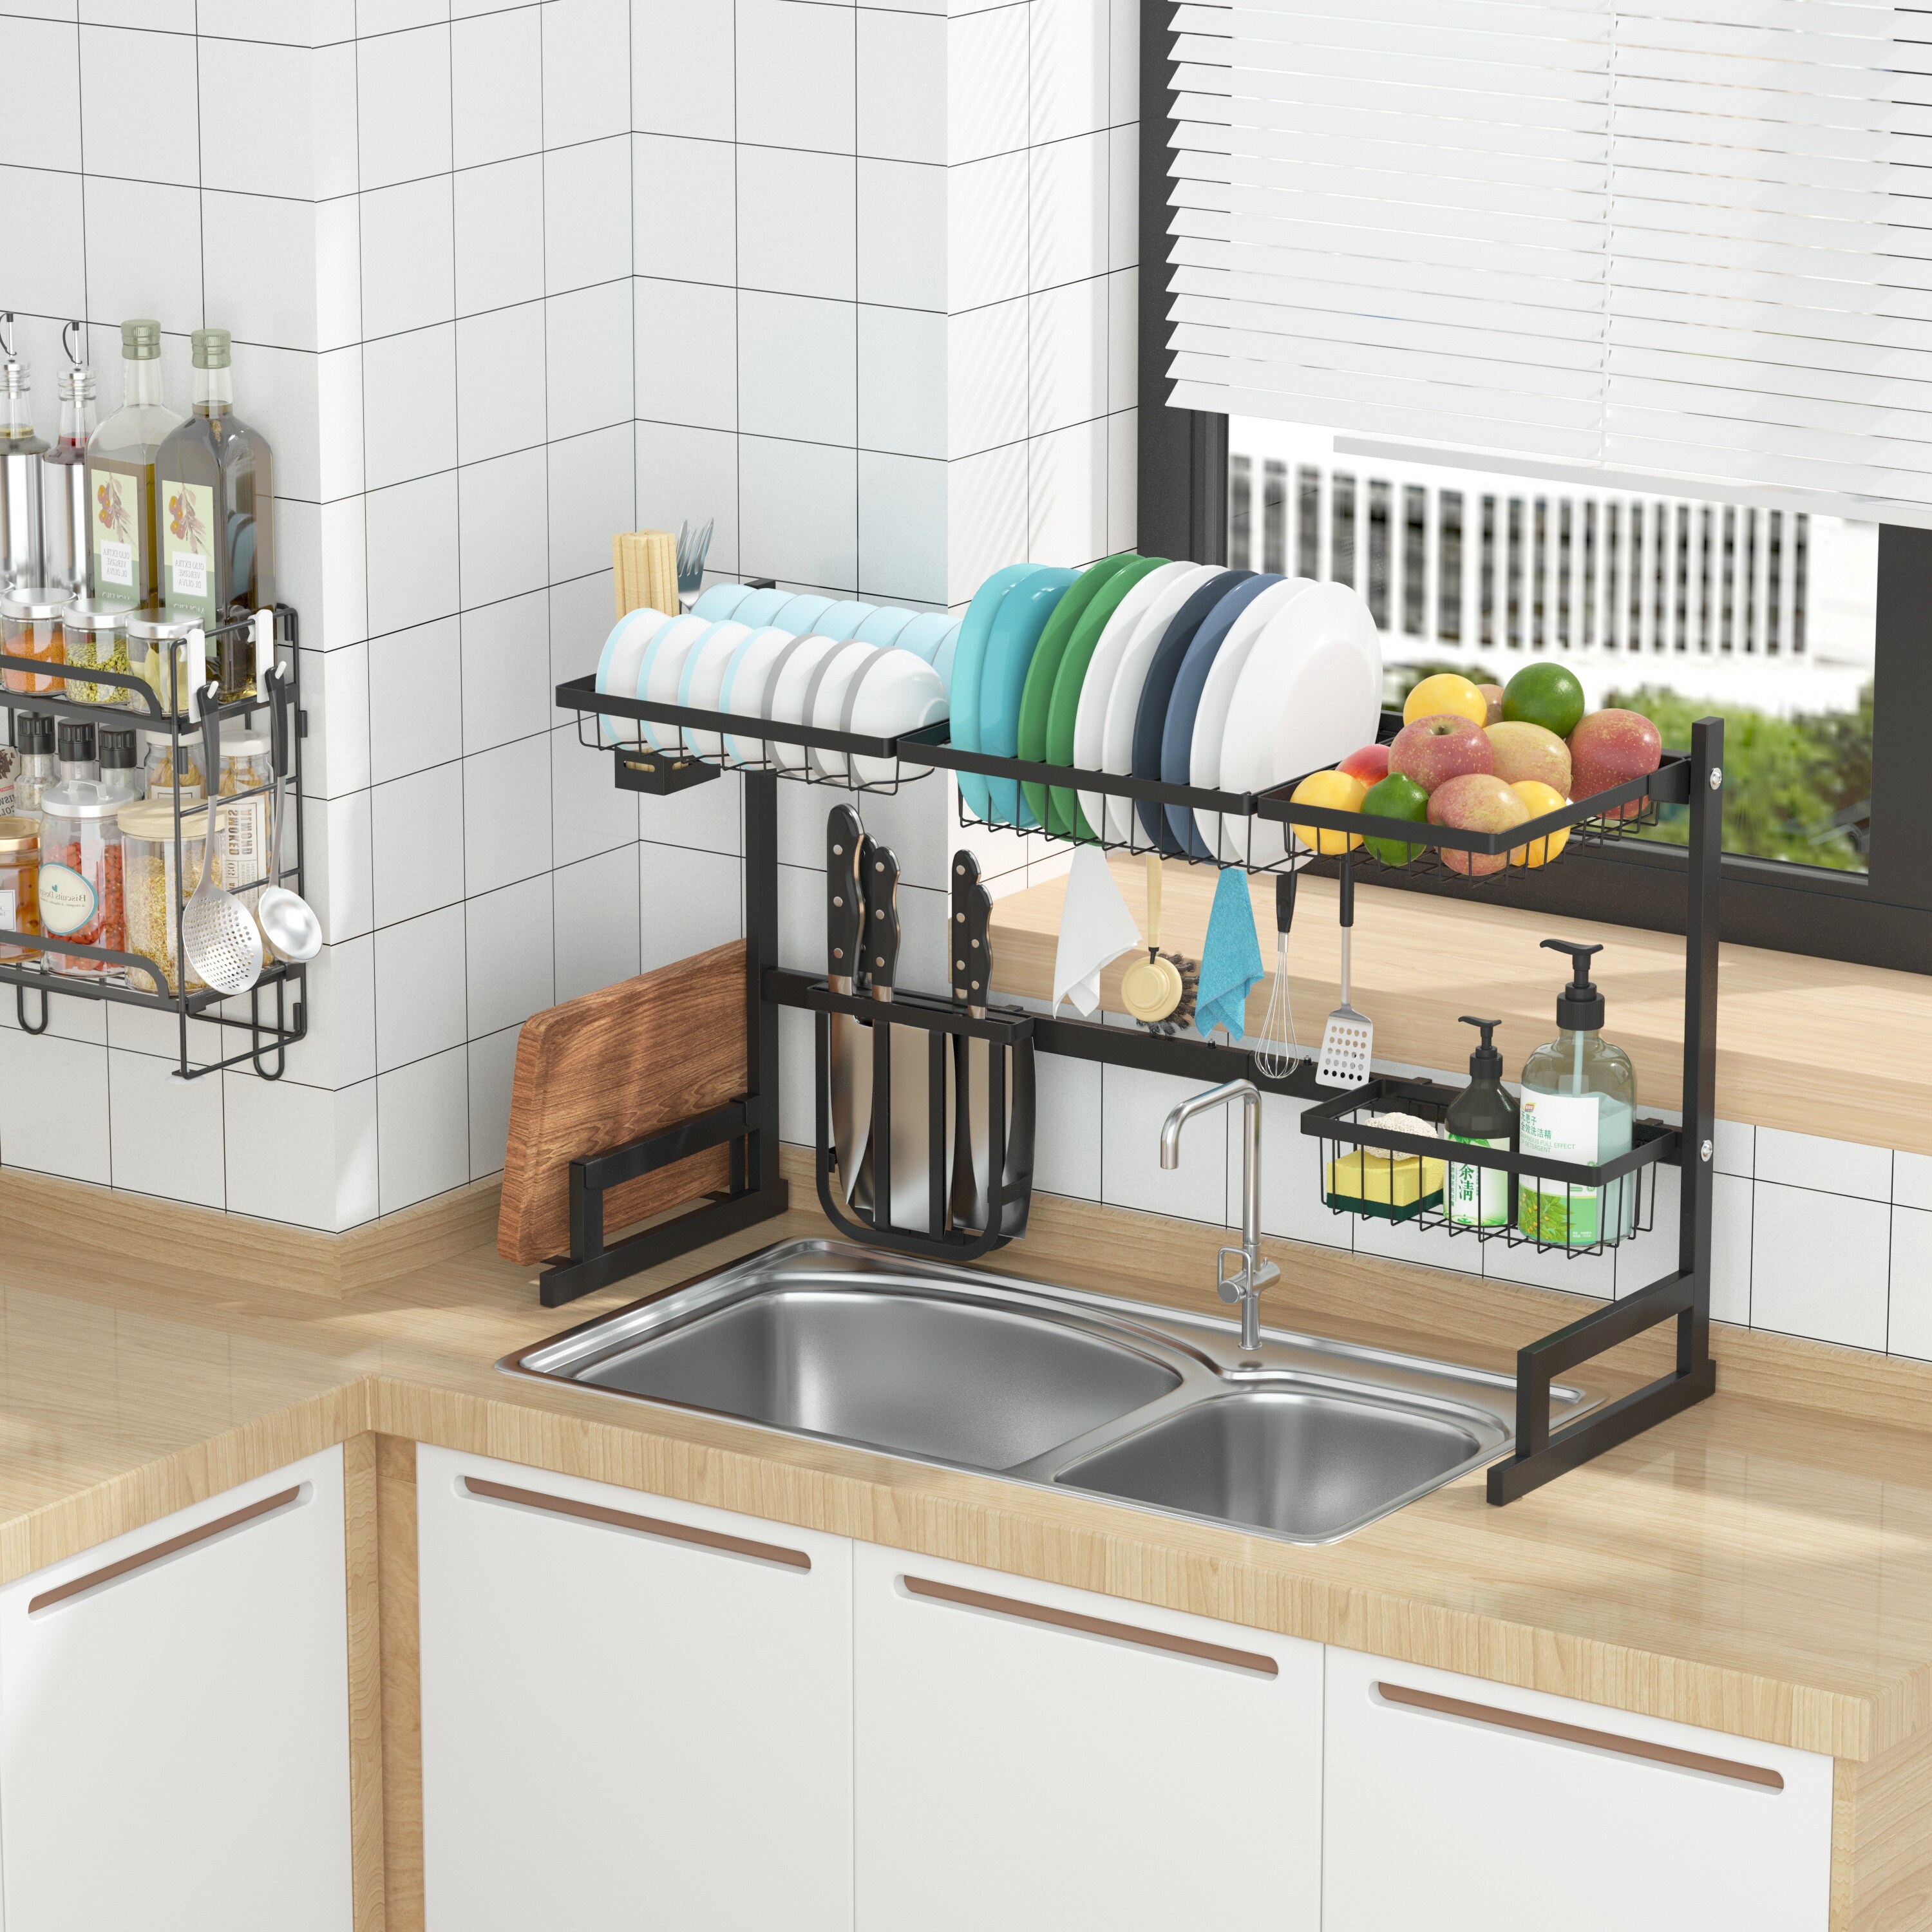 https://ak1.ostkcdn.com/images/products/is/images/direct/33ed00c7eef836555174108565d40e9da3407cea/Adjustable-Large-Dish-Drying-Rack-Metal-Over-the-Sink-Storage-Kitchen.jpg